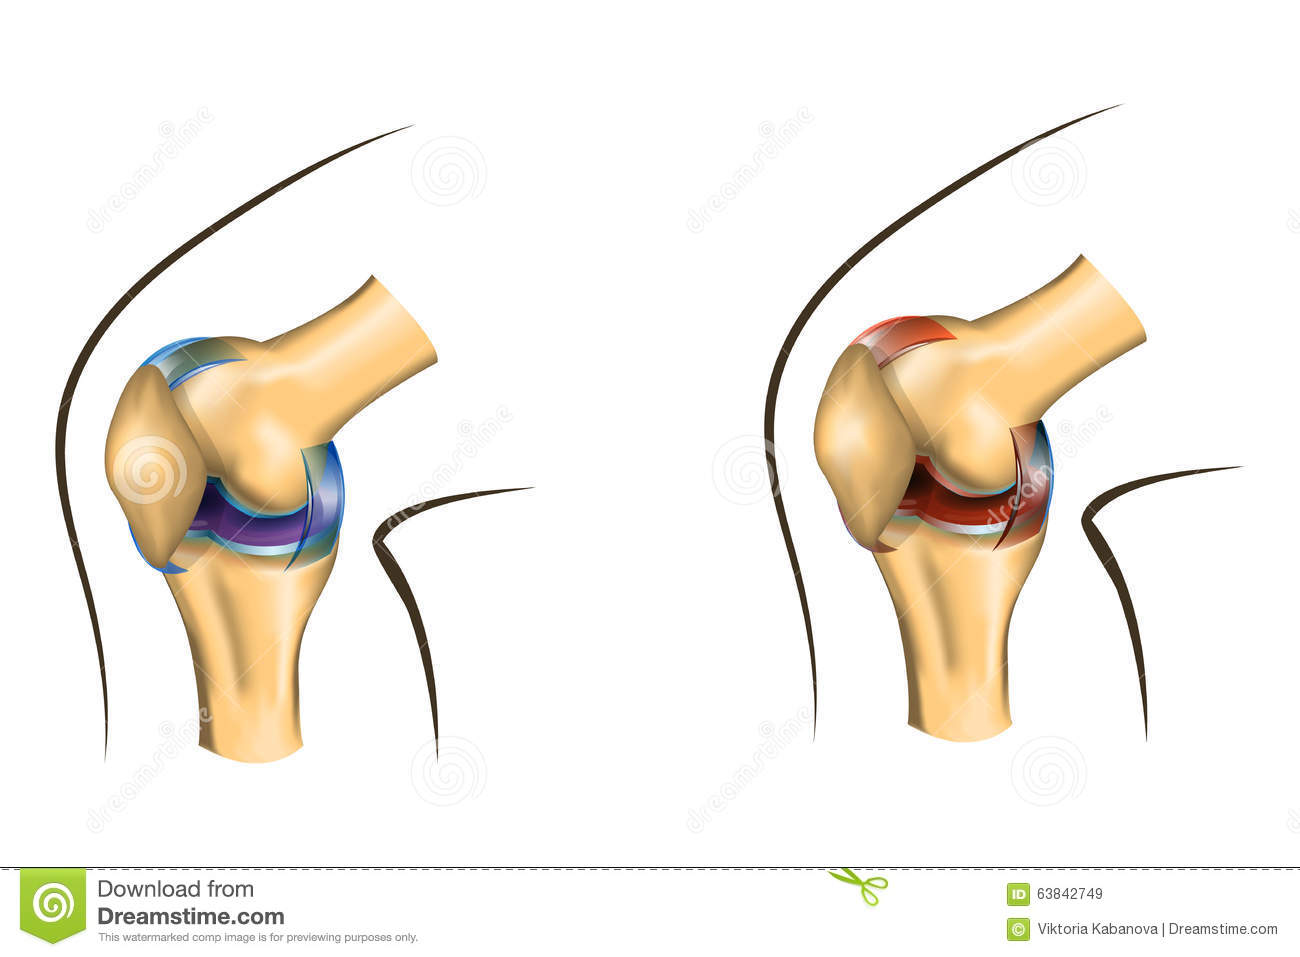 The Knee Joint Of Healthy And Damaged Stock Vector   Image  63842749